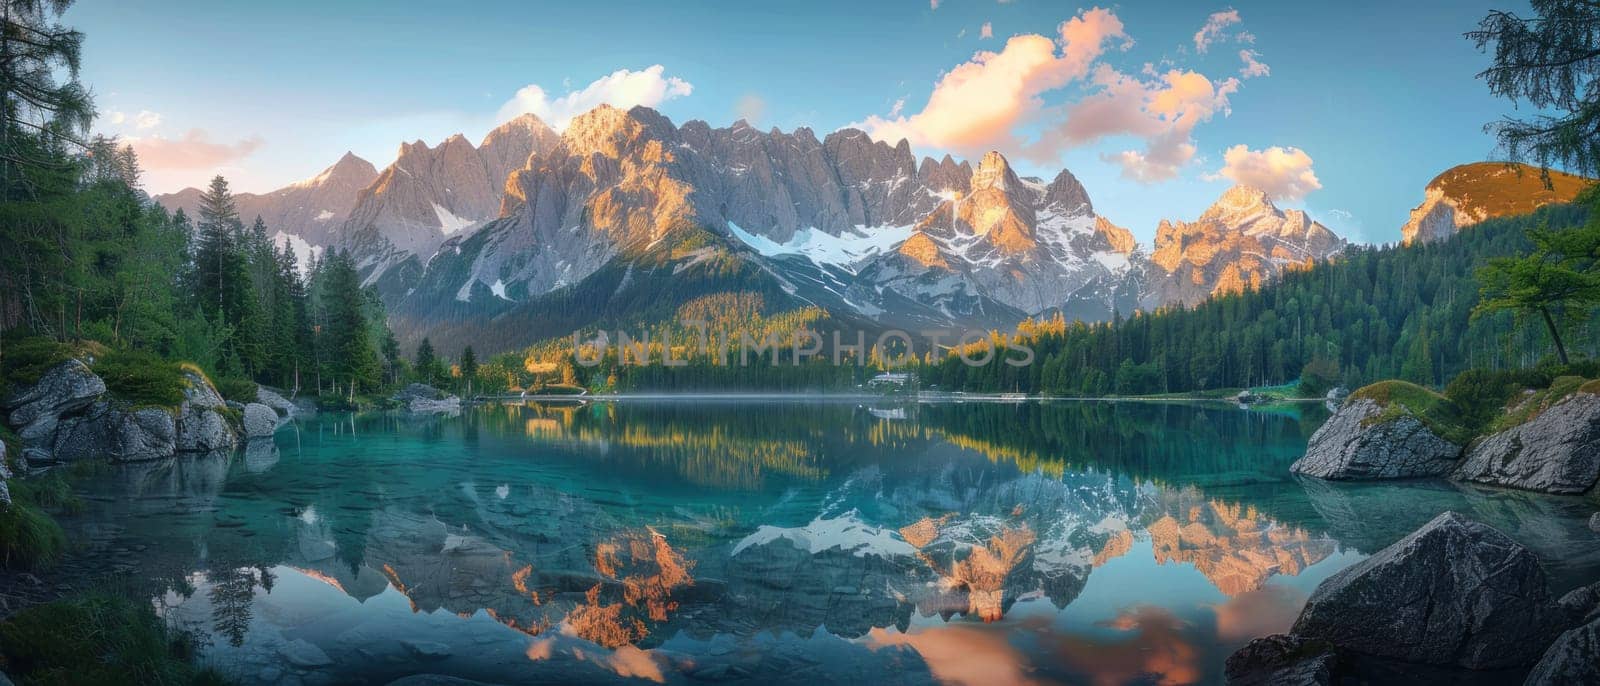 A beautiful mountain range with a lake in the foreground. The lake is calm and reflects the mountains in the distance. The sky is clear and the sun is shining brightly, creating a serene